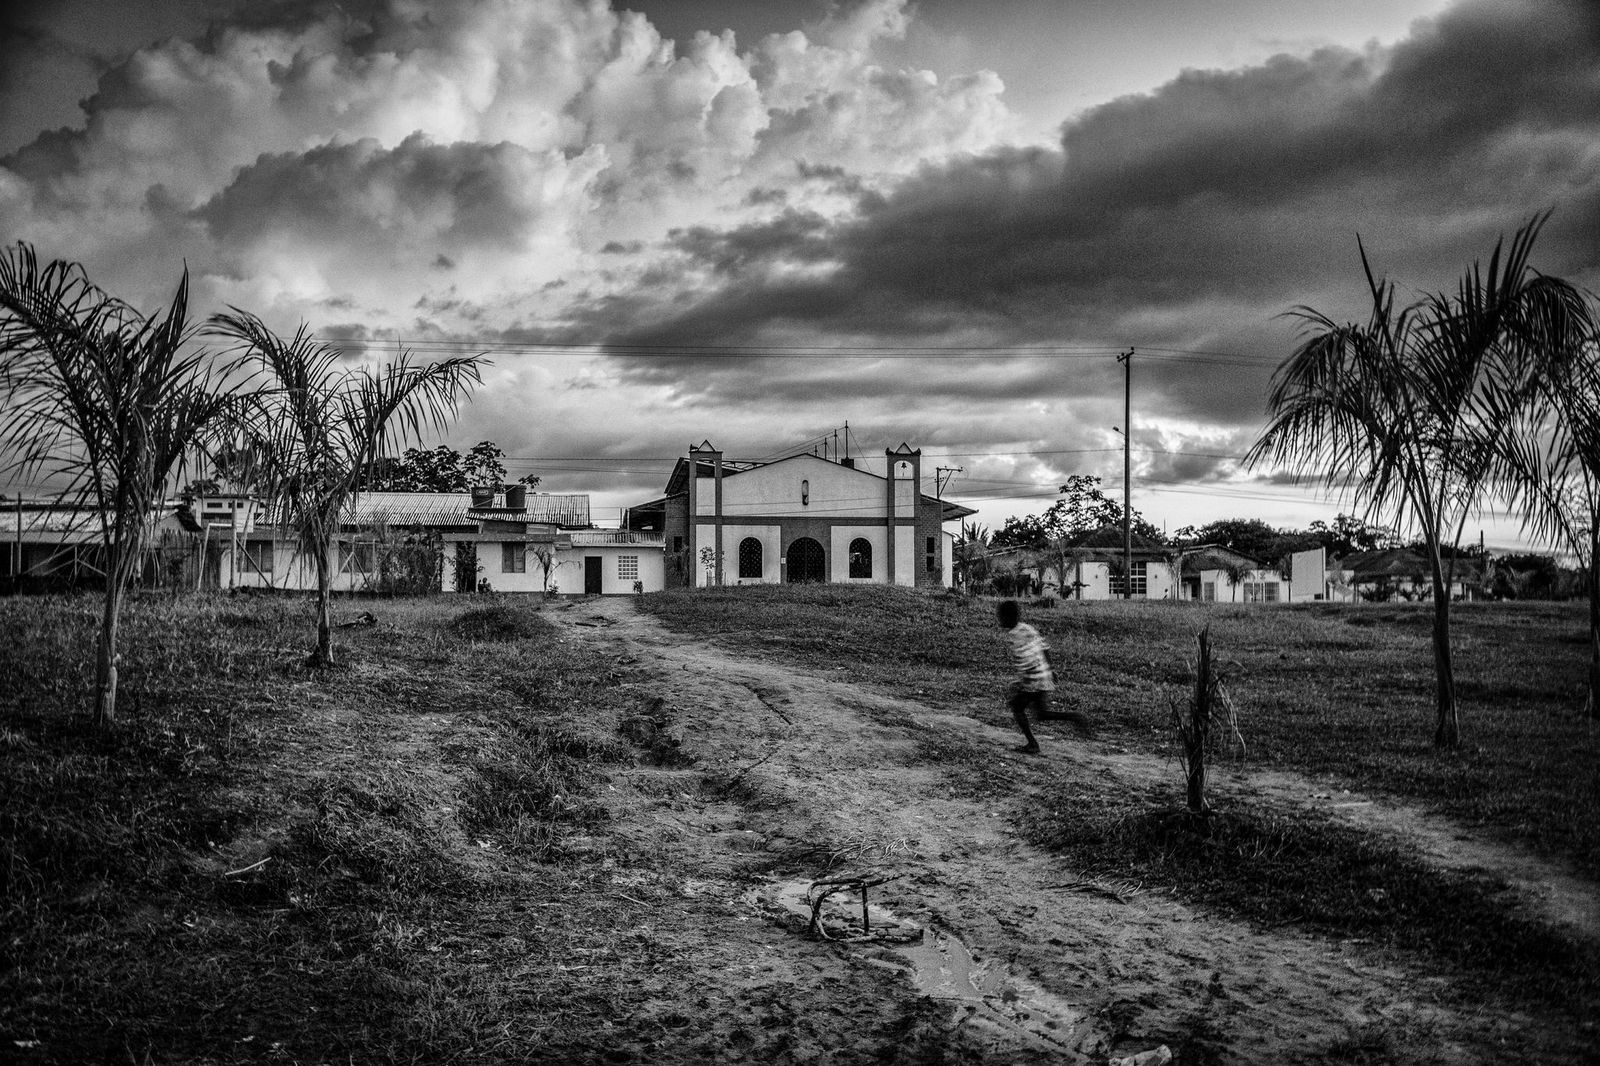 A boy runs through the center of the town of Bella Vista. The town was rebuild in 2010 after it was sieged by clashes between the 36 front faction of FARC and paramilitaries. Bella Vista, Colombia. July 18, 2013.